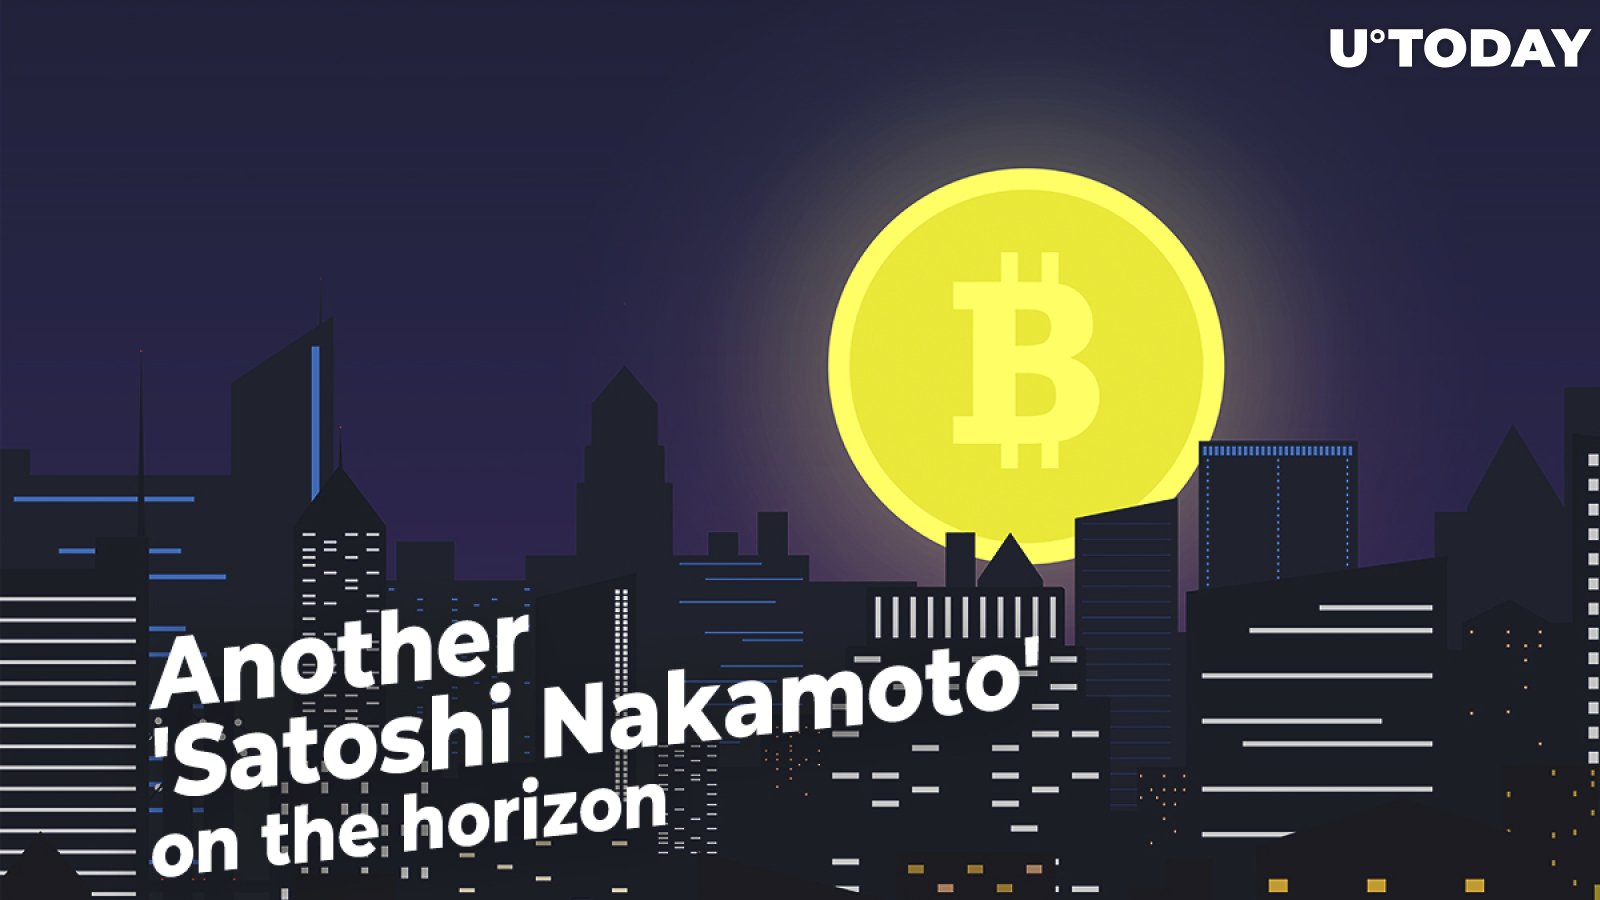 Breaking: Bitcoin Price Could Change as Another 'Satoshi' Seeks to Copyright BTC Whitepaper